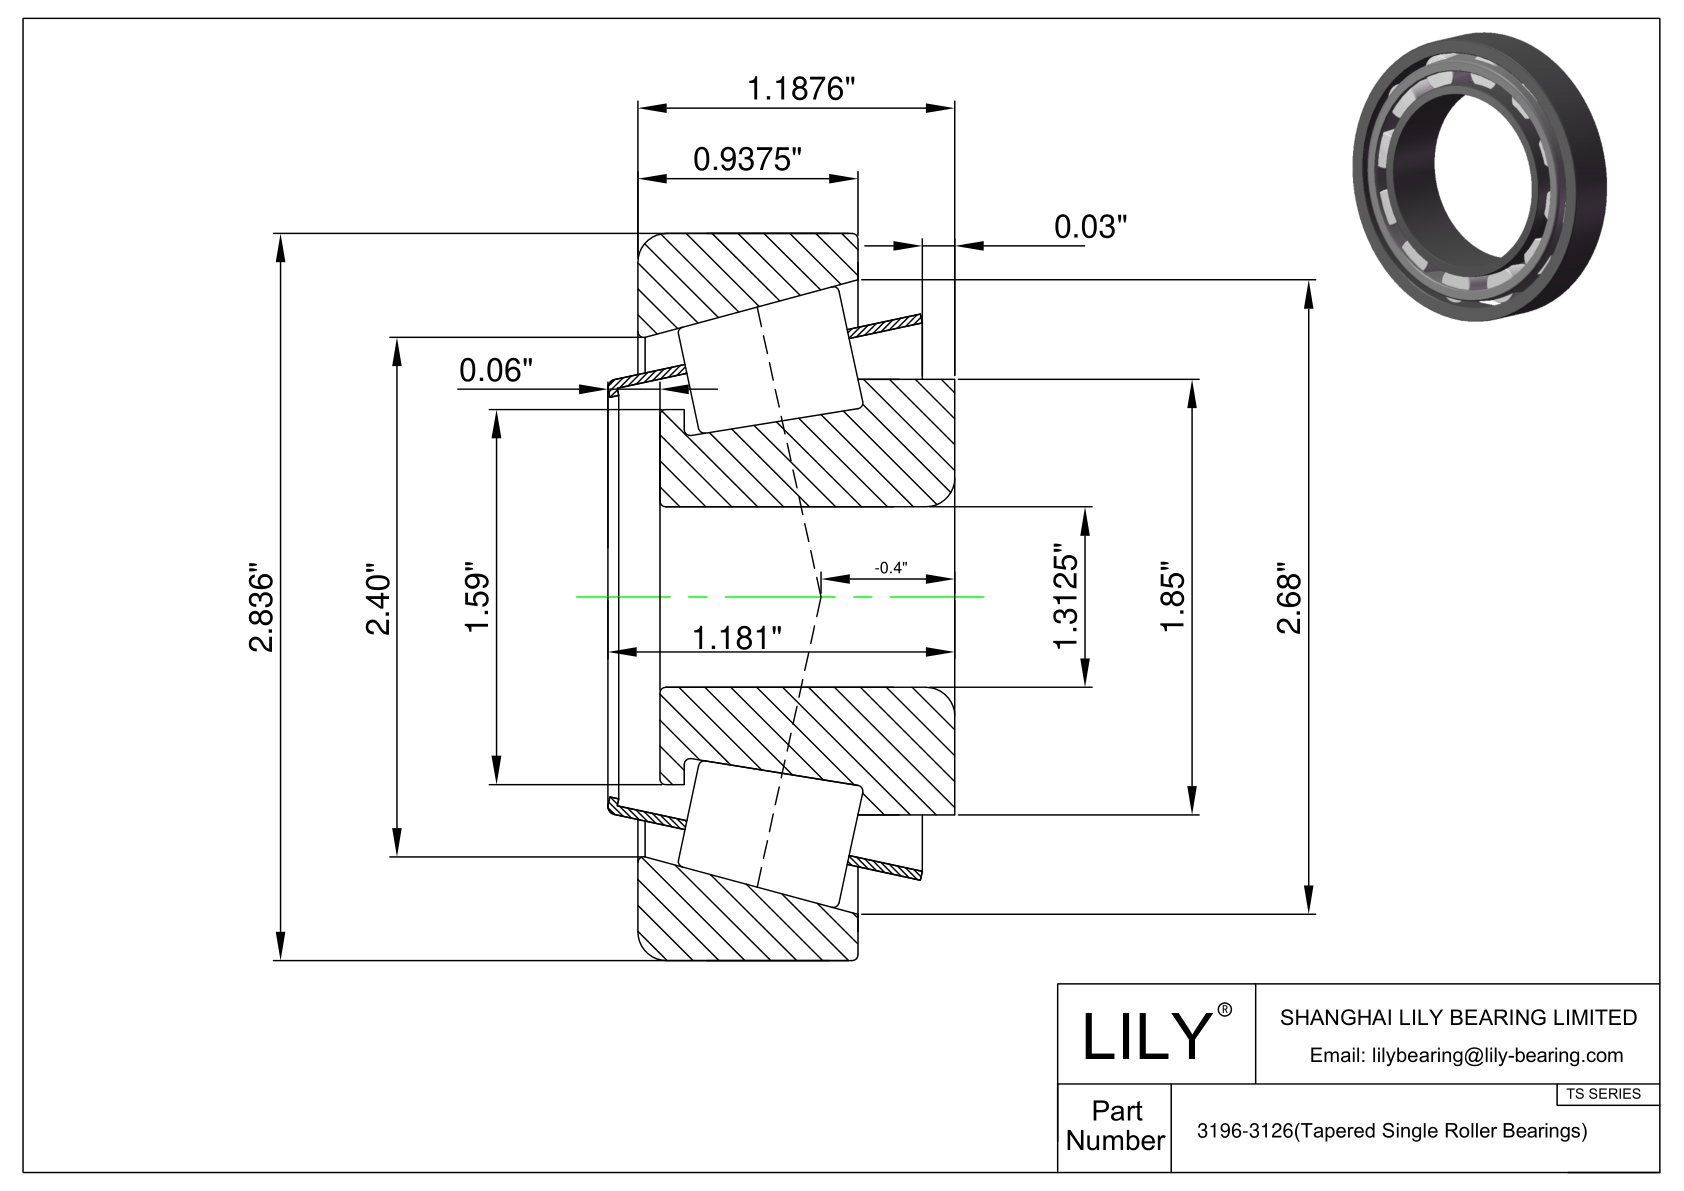 3196-3126 TS (Tapered Single Roller Bearings) (Imperial) cad drawing